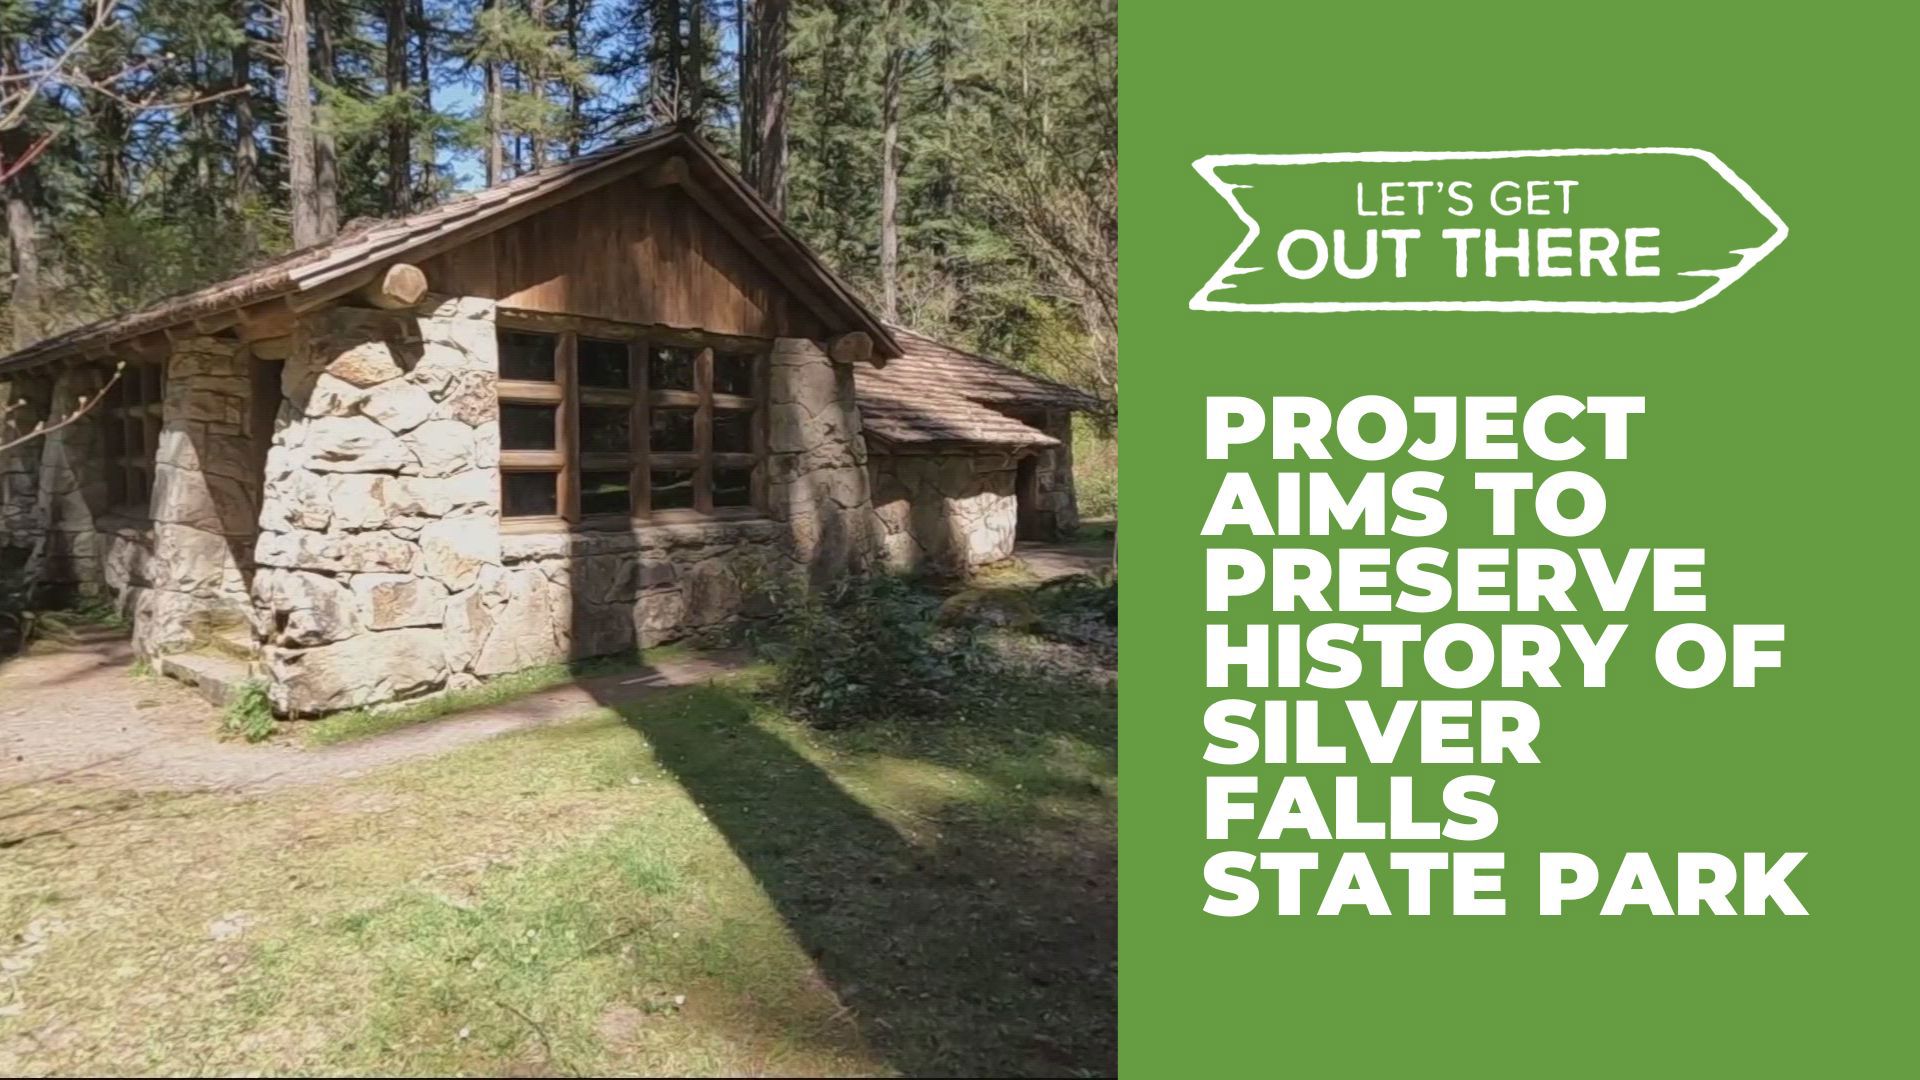 Oregon State Parks is capturing 3D scans of the Historic South Falls Lodge in Silver Falls State Park as part of a digital insurance policy against wildfire damage.